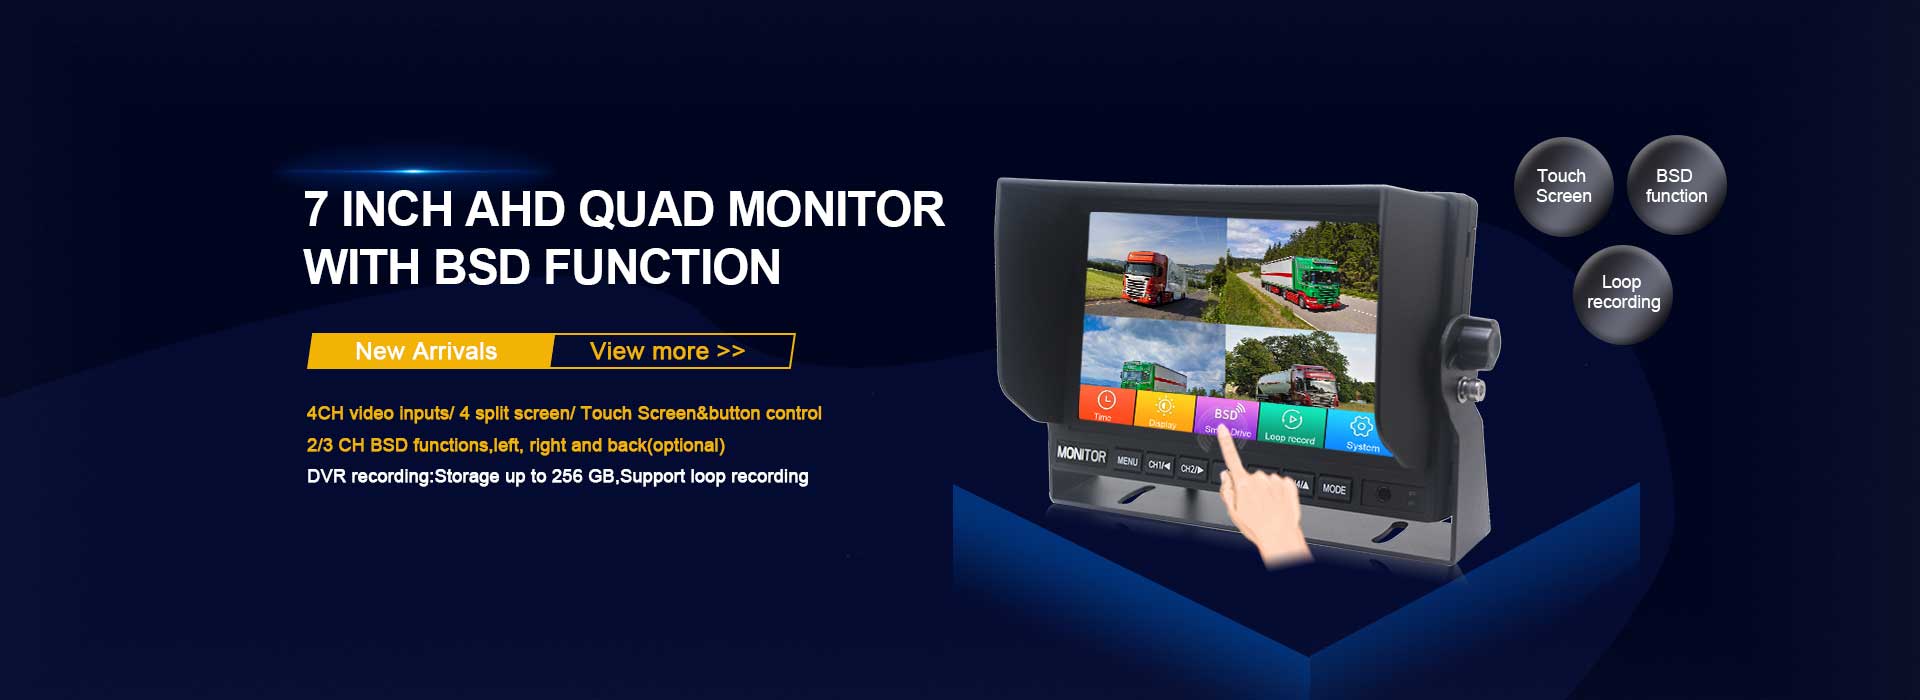 7 Inch AHD Quad Monitor With BSD Function  